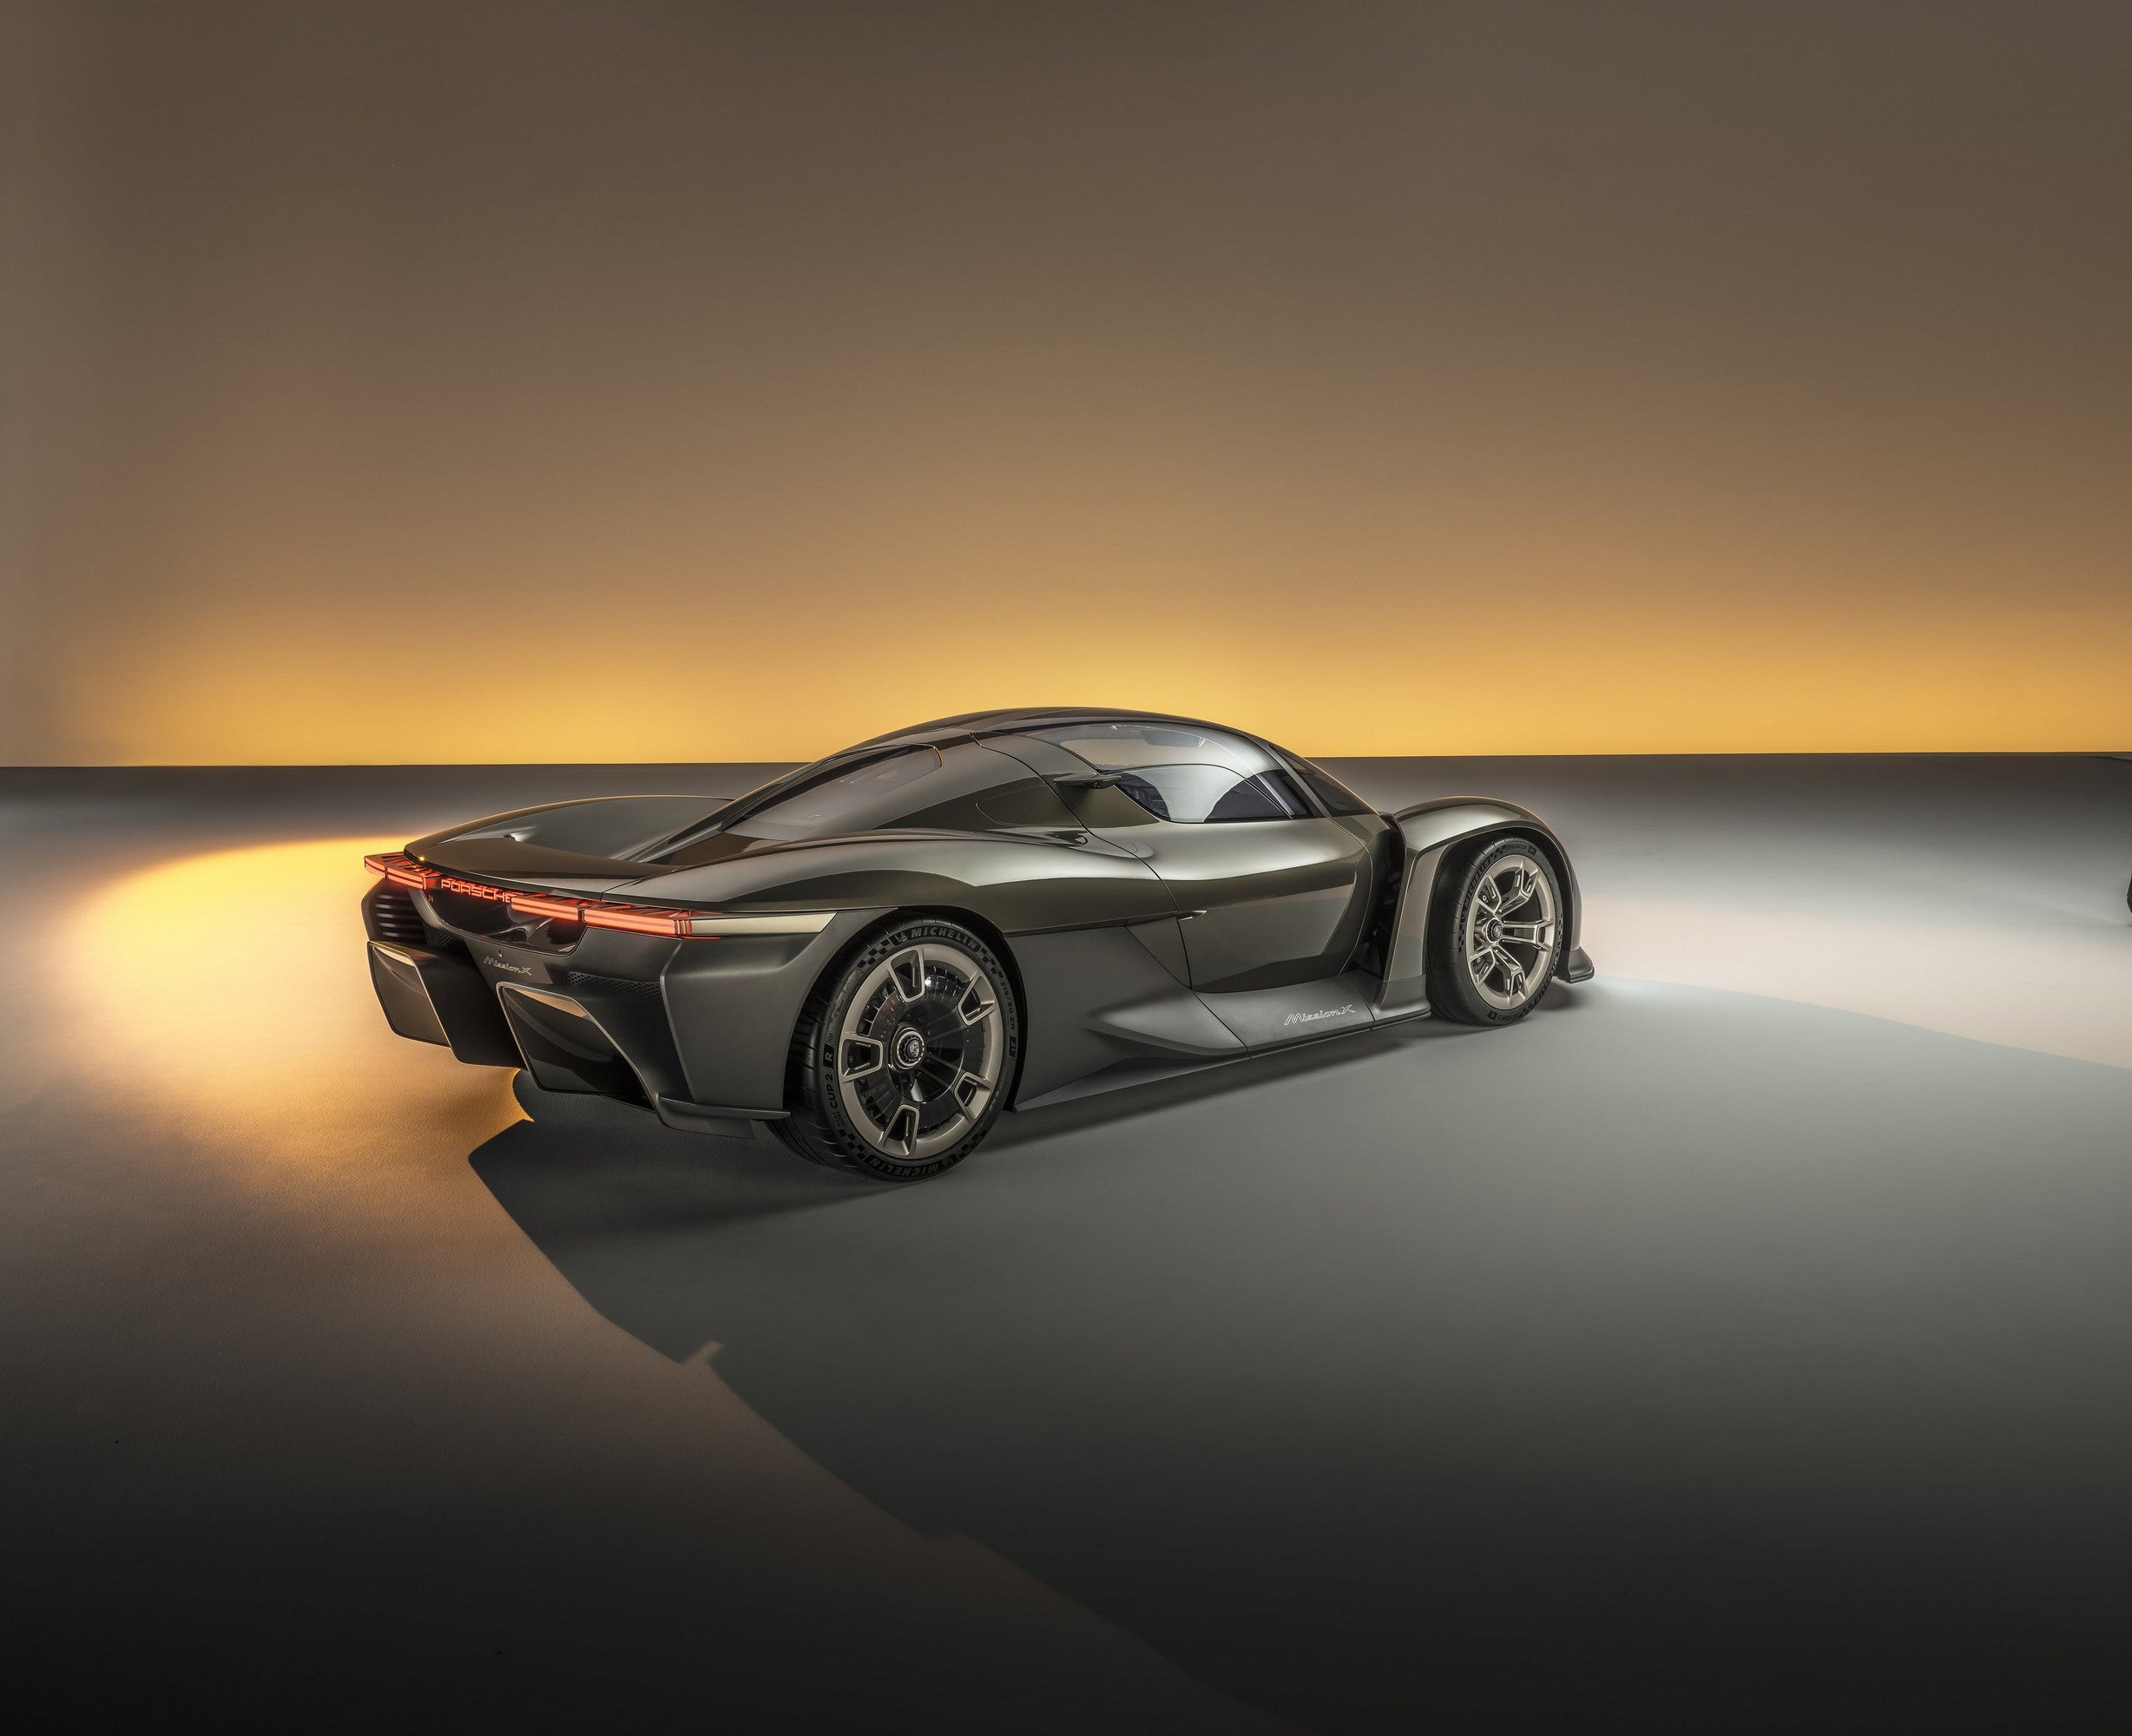 Oh My God: Porsche Debuts Its Stunning Mission X Electric Hypercar Concept